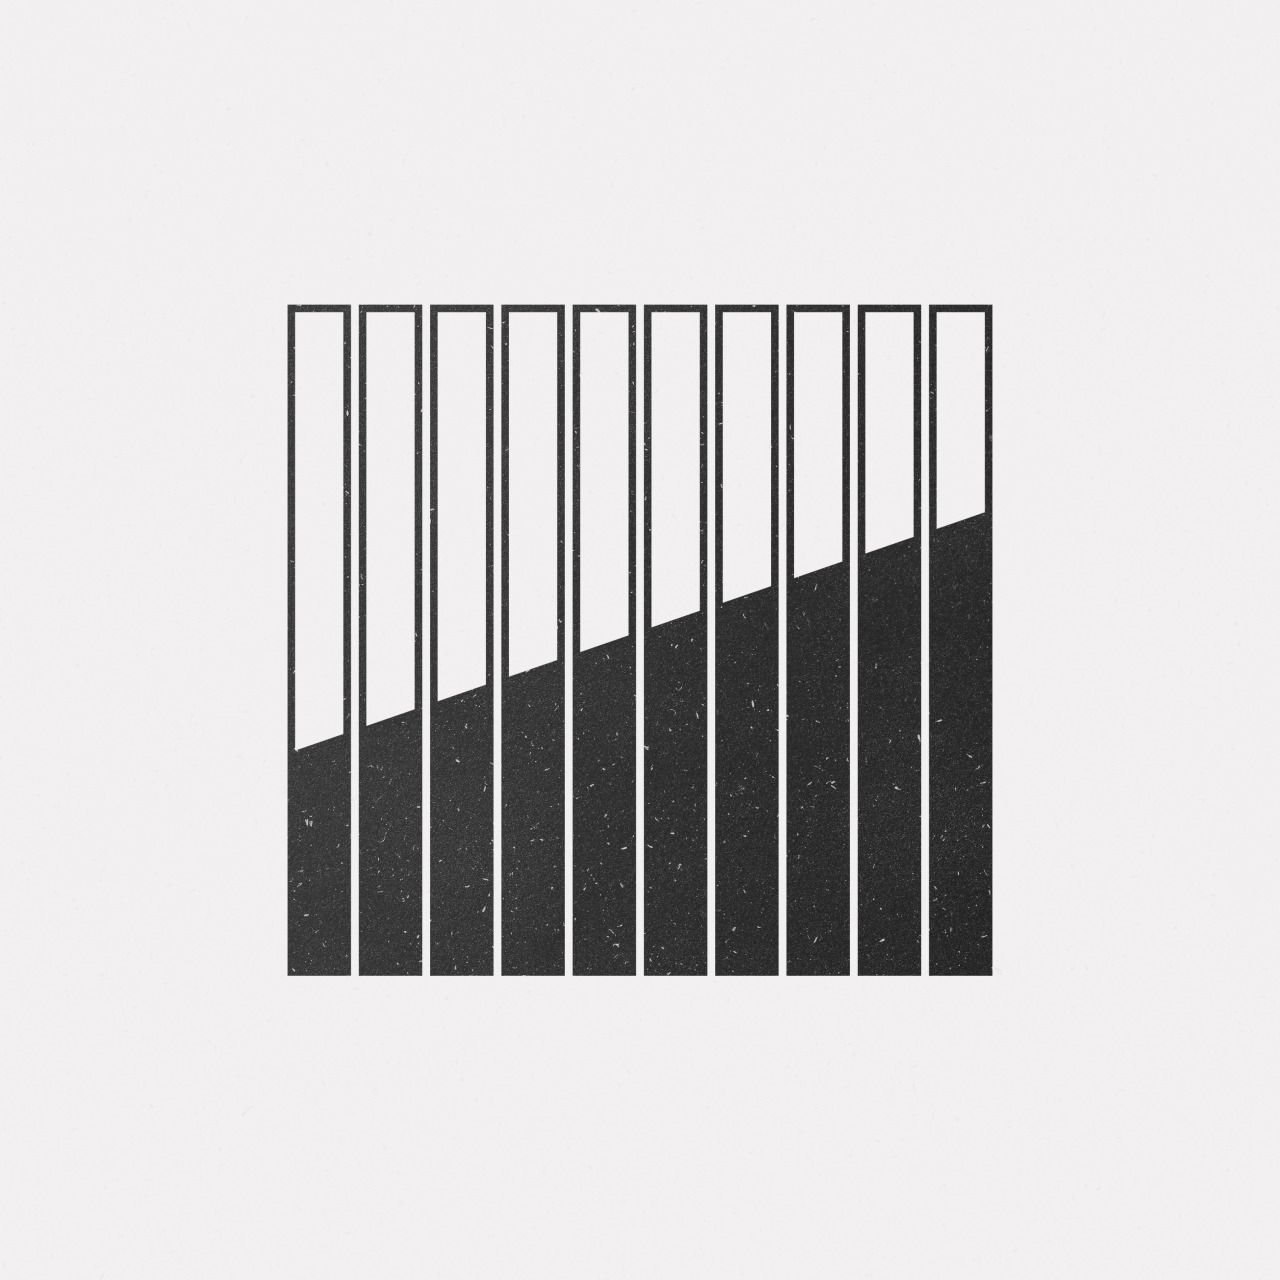 DAILY MINIMAL - #JL15-260 A new geometric design every day.